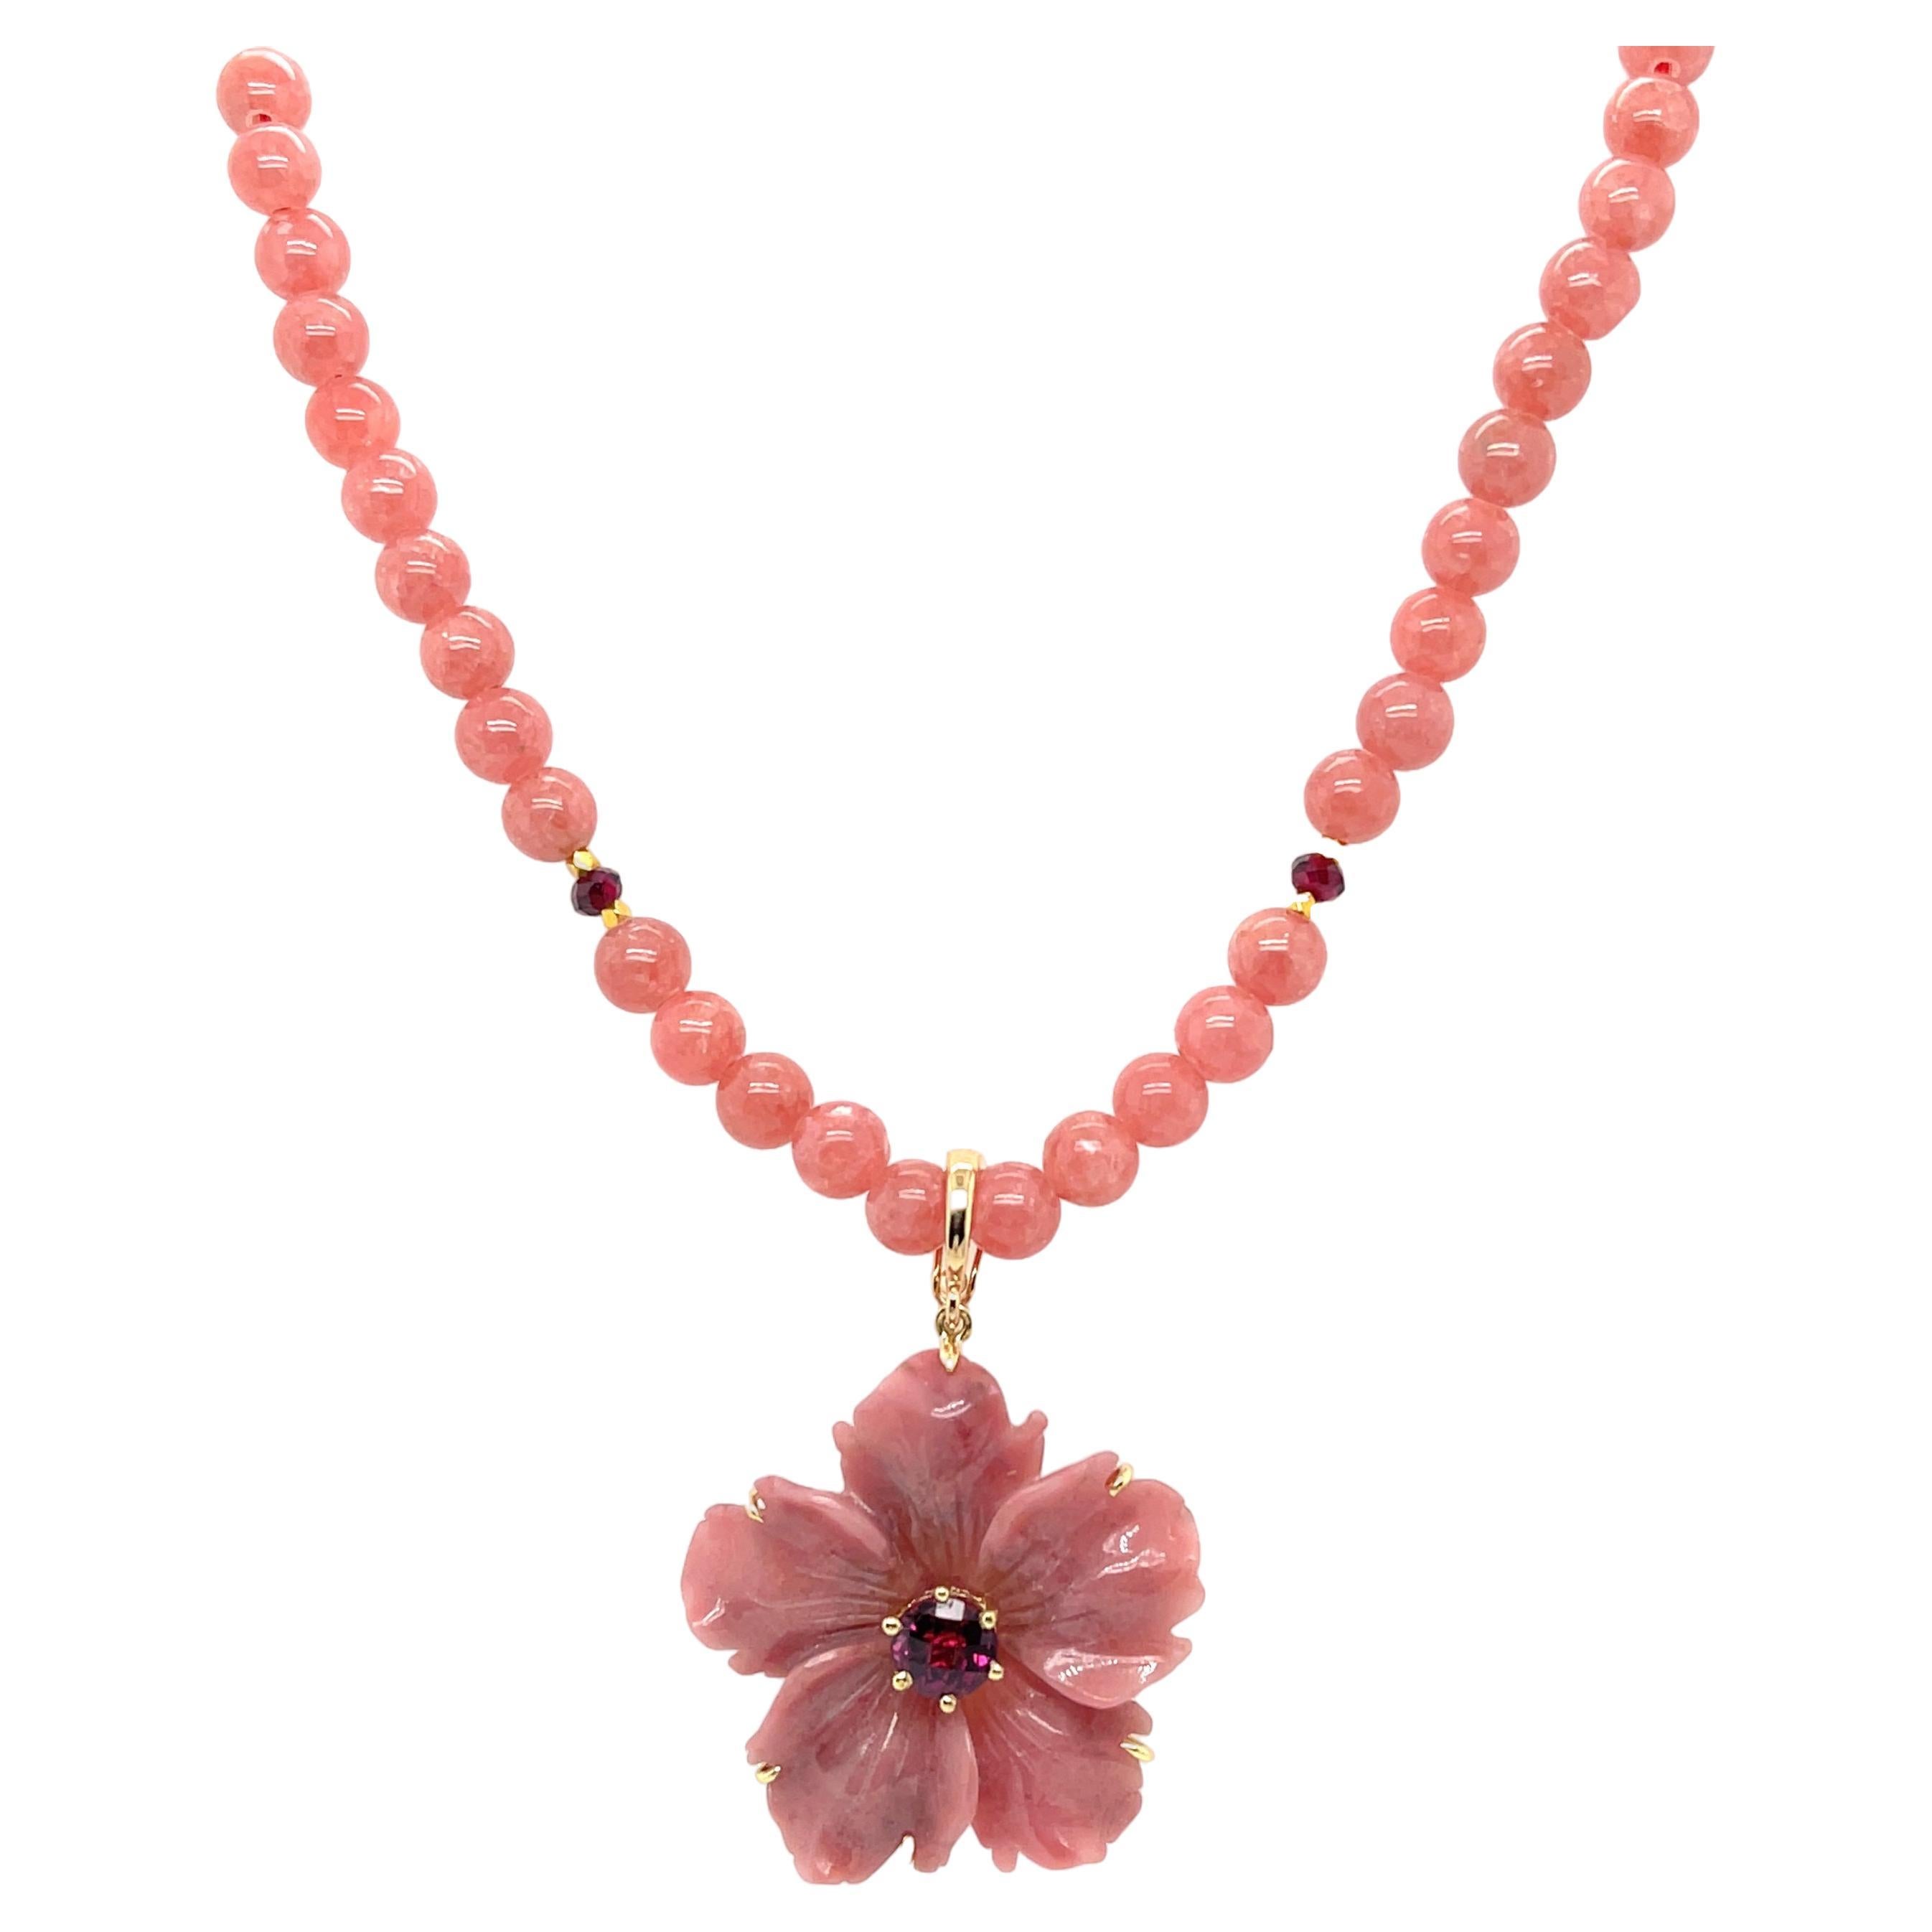  Rhodochrosite Beaded Necklace with Hand Carved Rhodonite Floral Pendant 